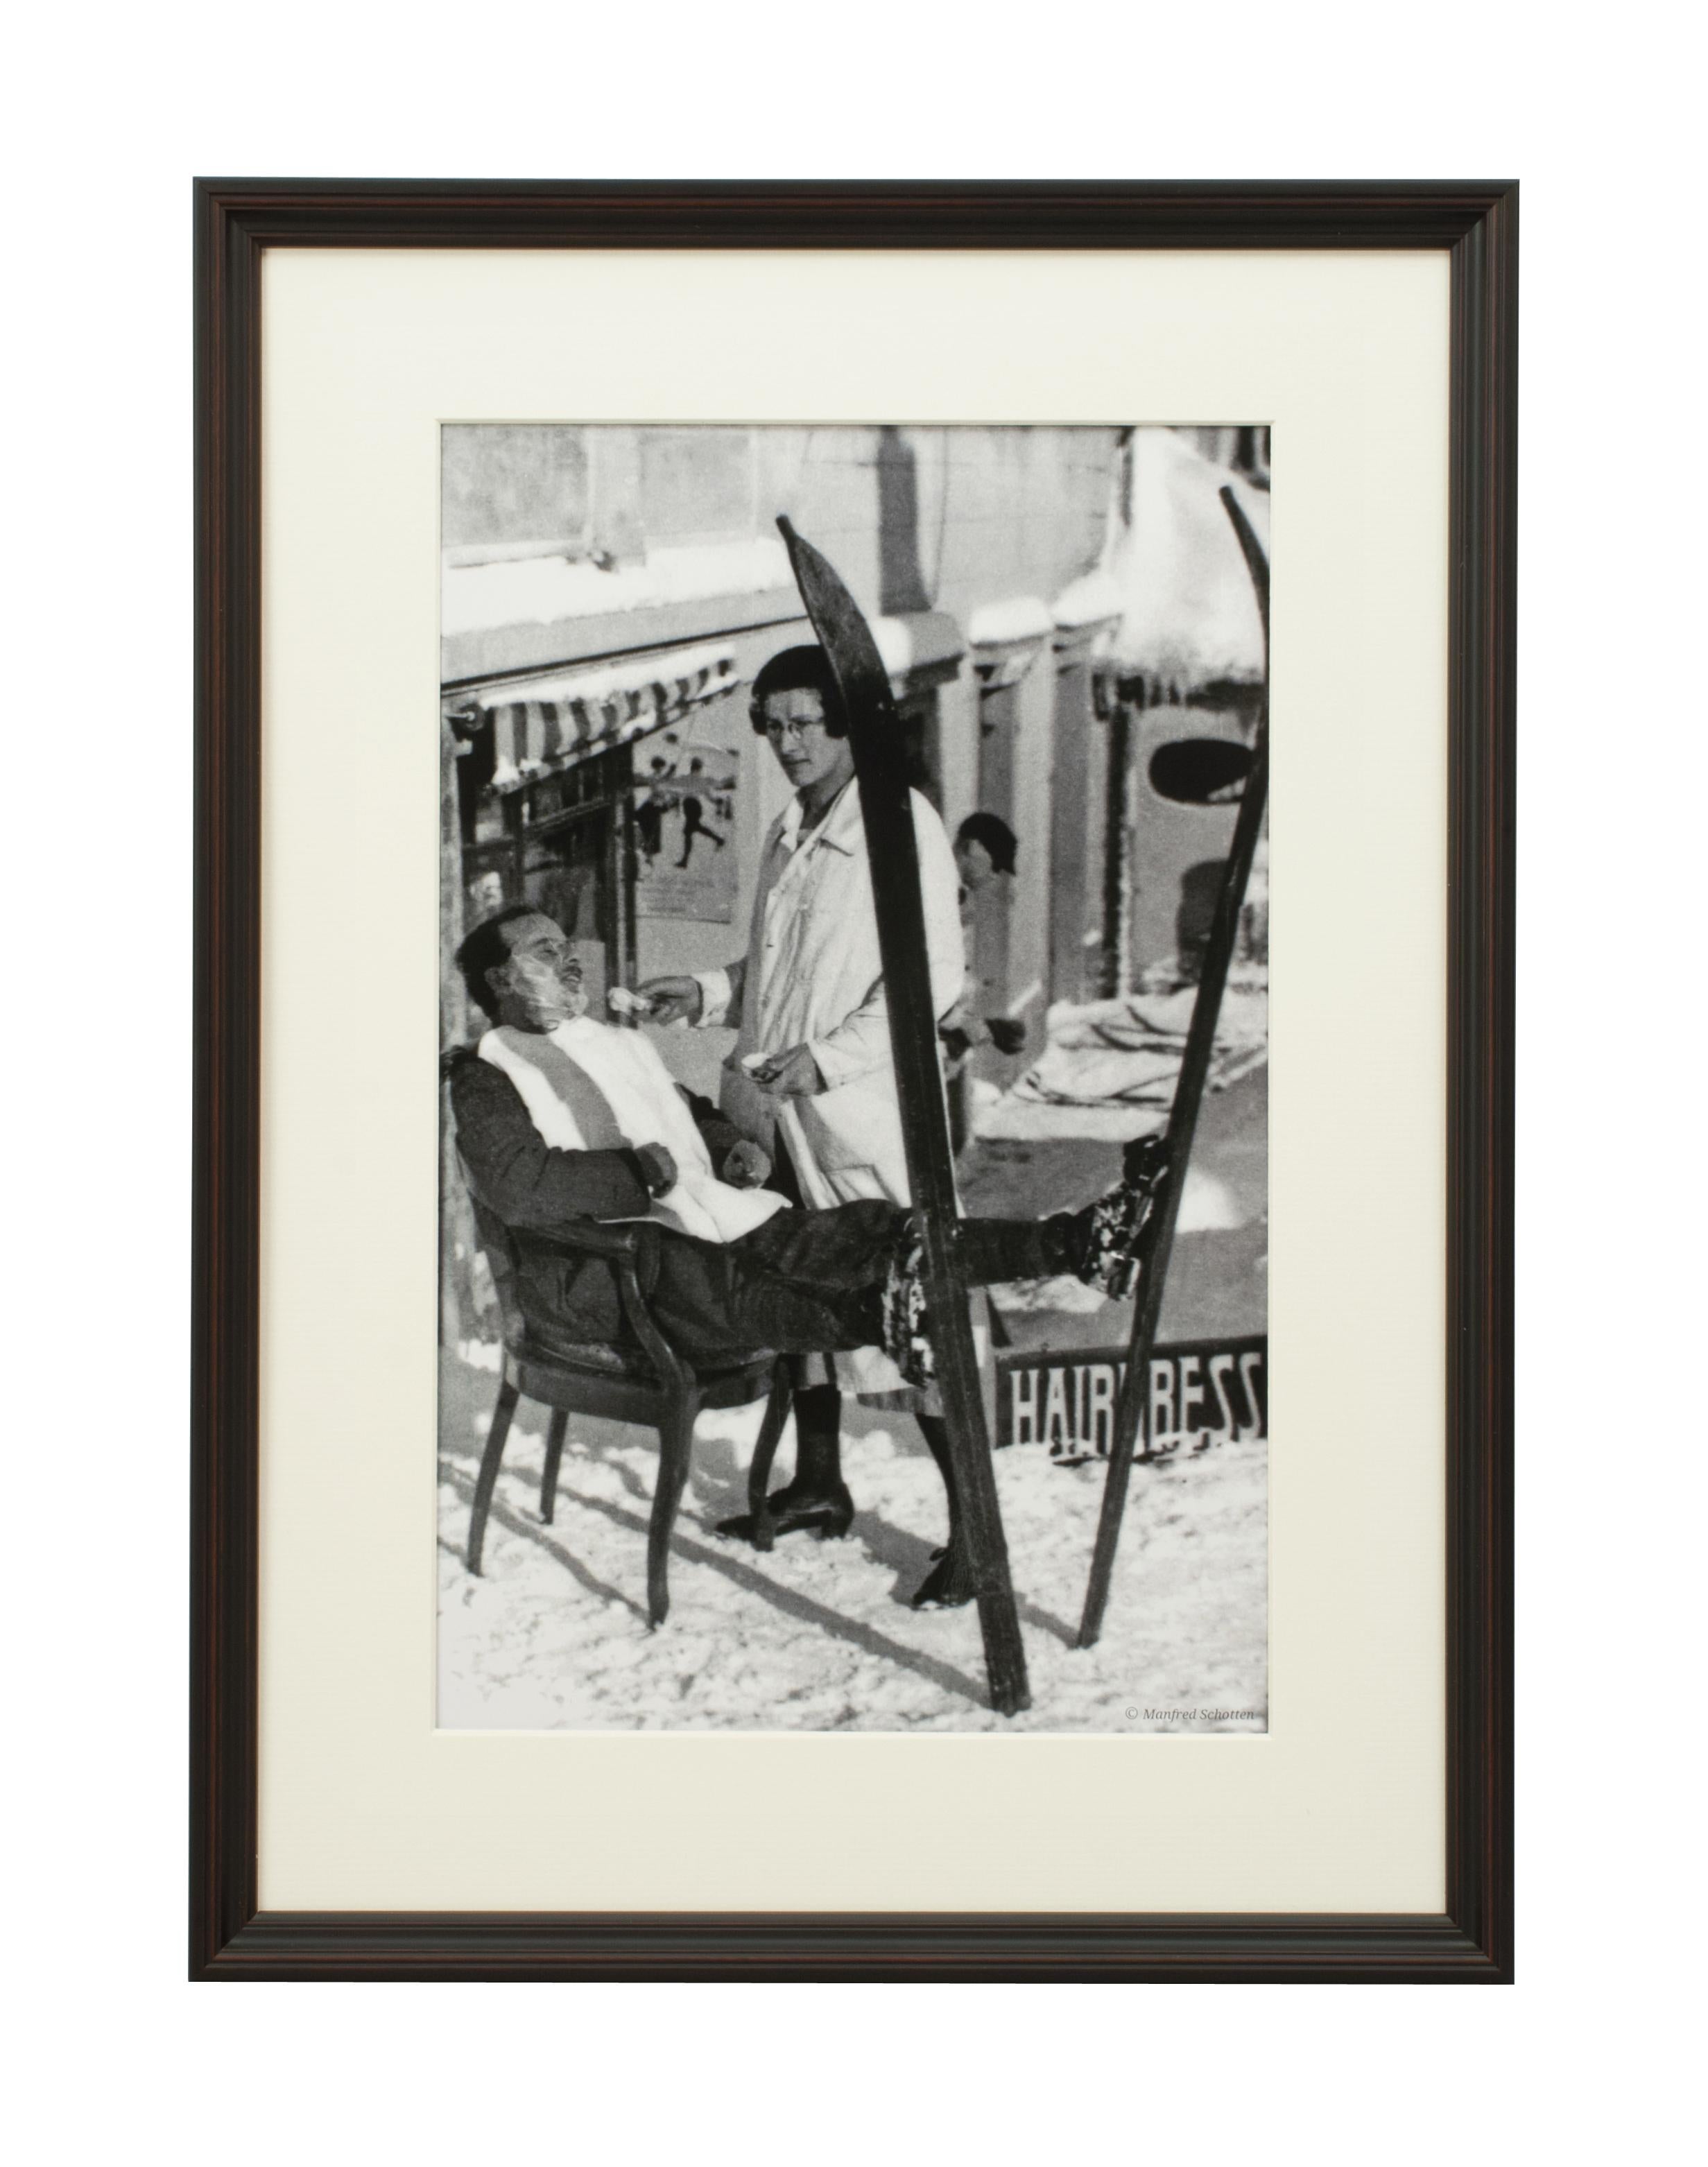 Paper Alpine Ski Photograph, 'Haircut Sir', Taken from 1930s Original For Sale